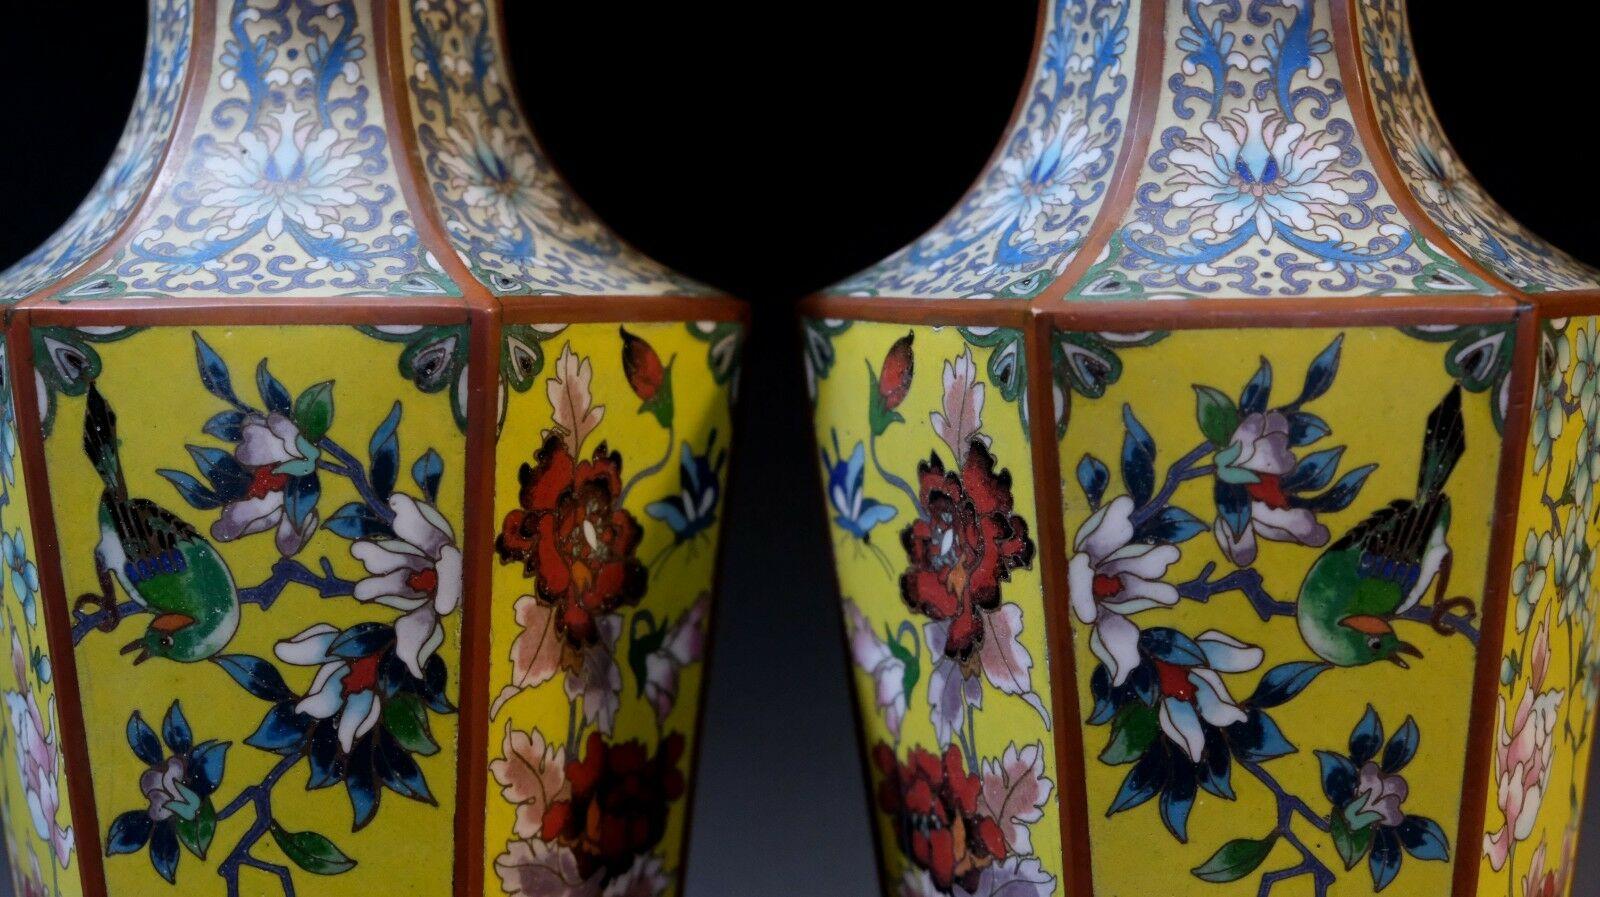 Matching Pair of Pair of French Victorian Cloisonné Vases, 19th Century In Good Condition For Sale In Norton, MA